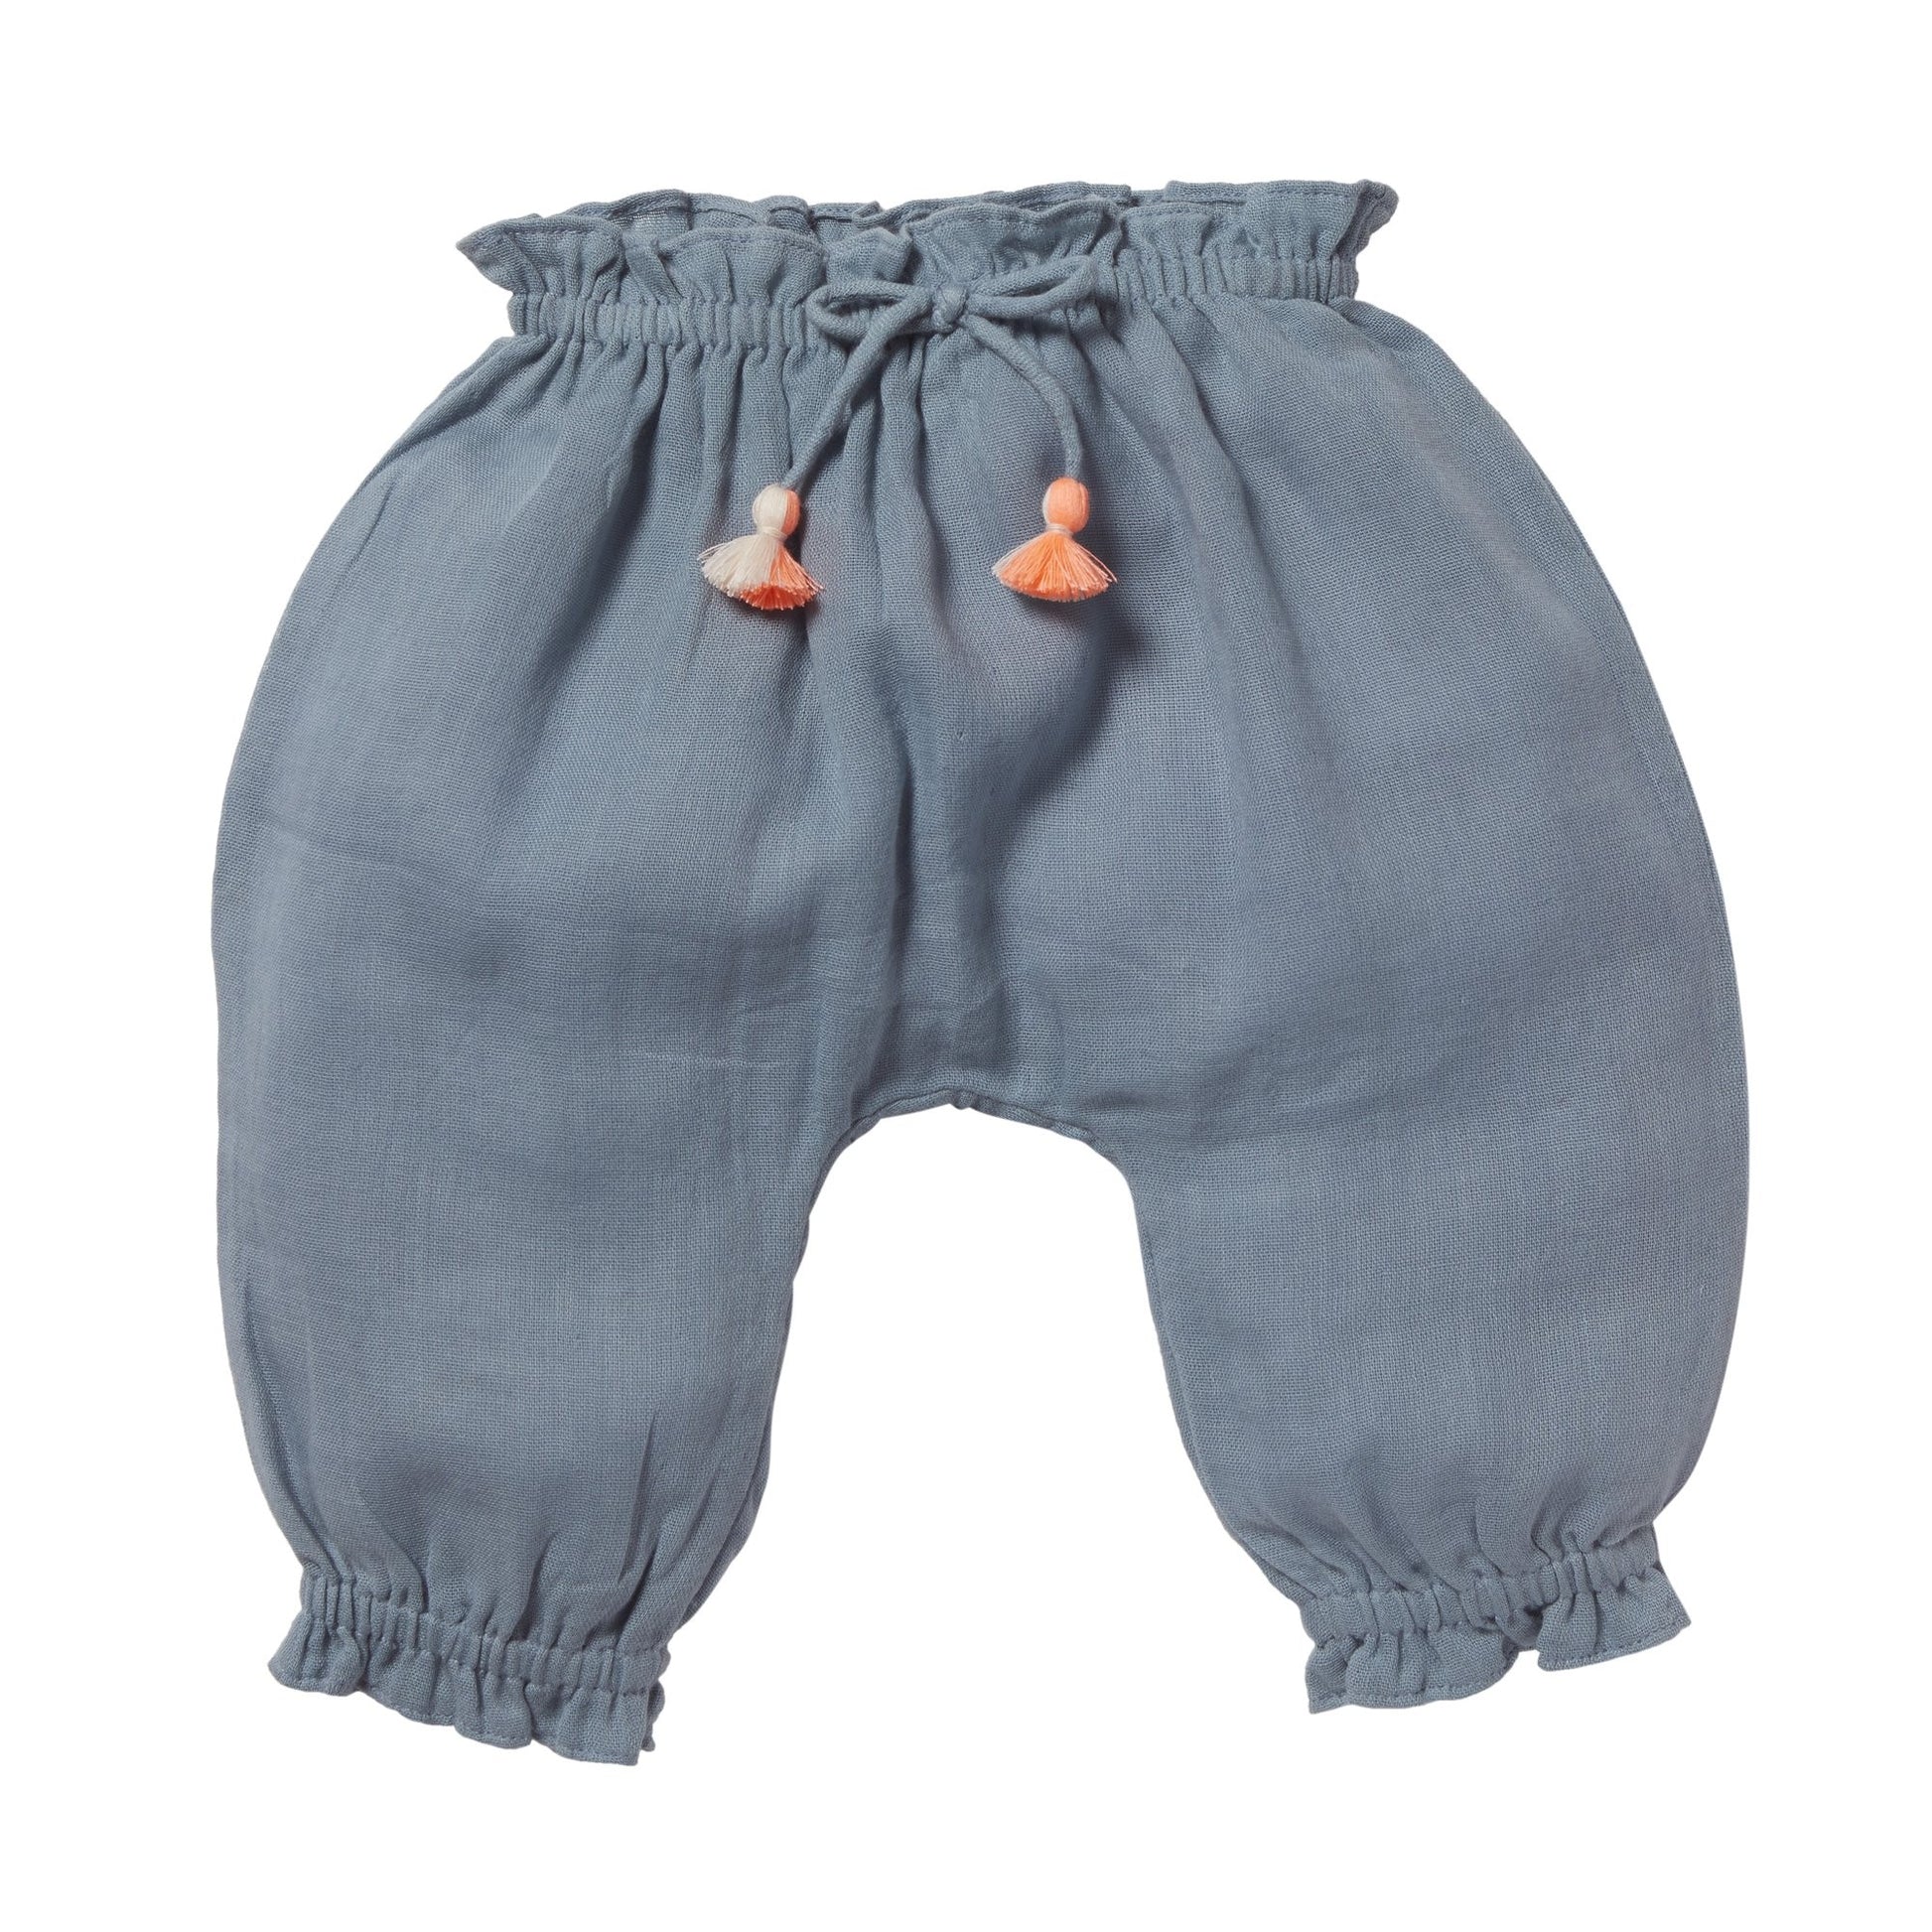 ASTHER BABY PANTS, BLUE STORM - Cemarose Children's Fashion Boutique